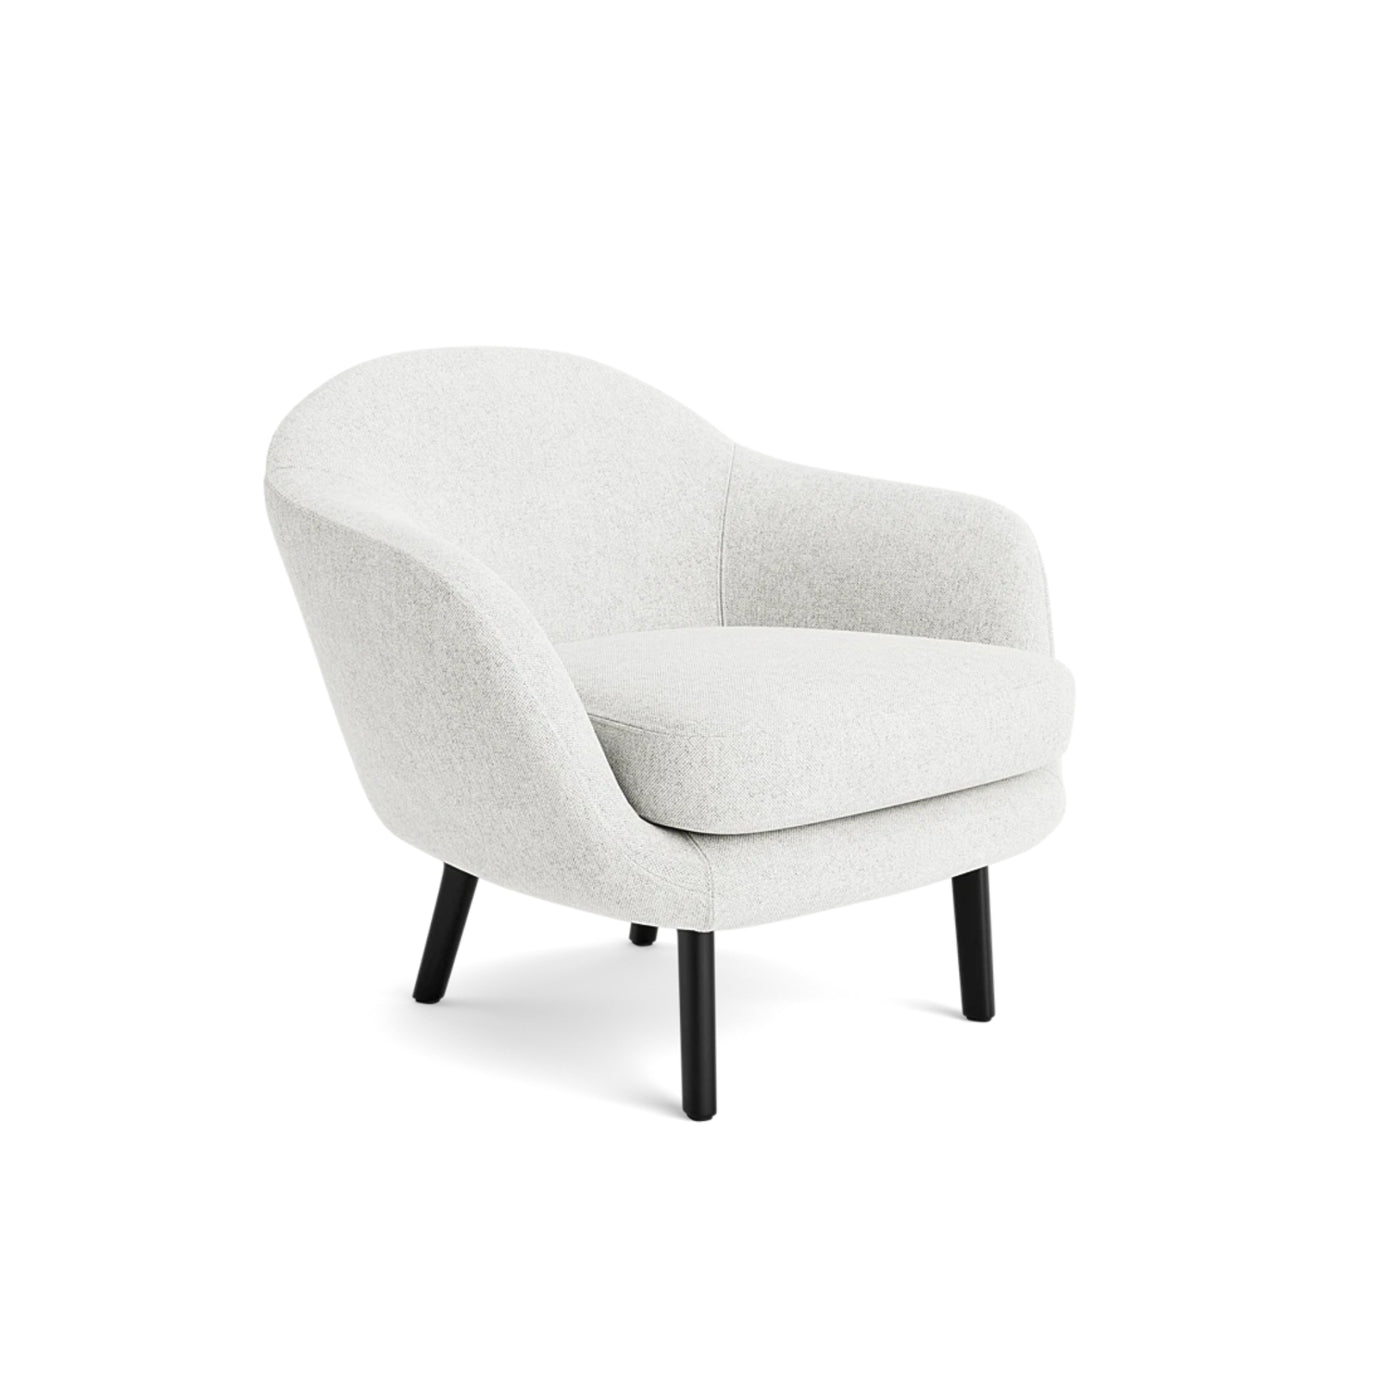 Normann Copenhagen Sum Armchair. Made to order at someday designs. #colour_hallingdal-110